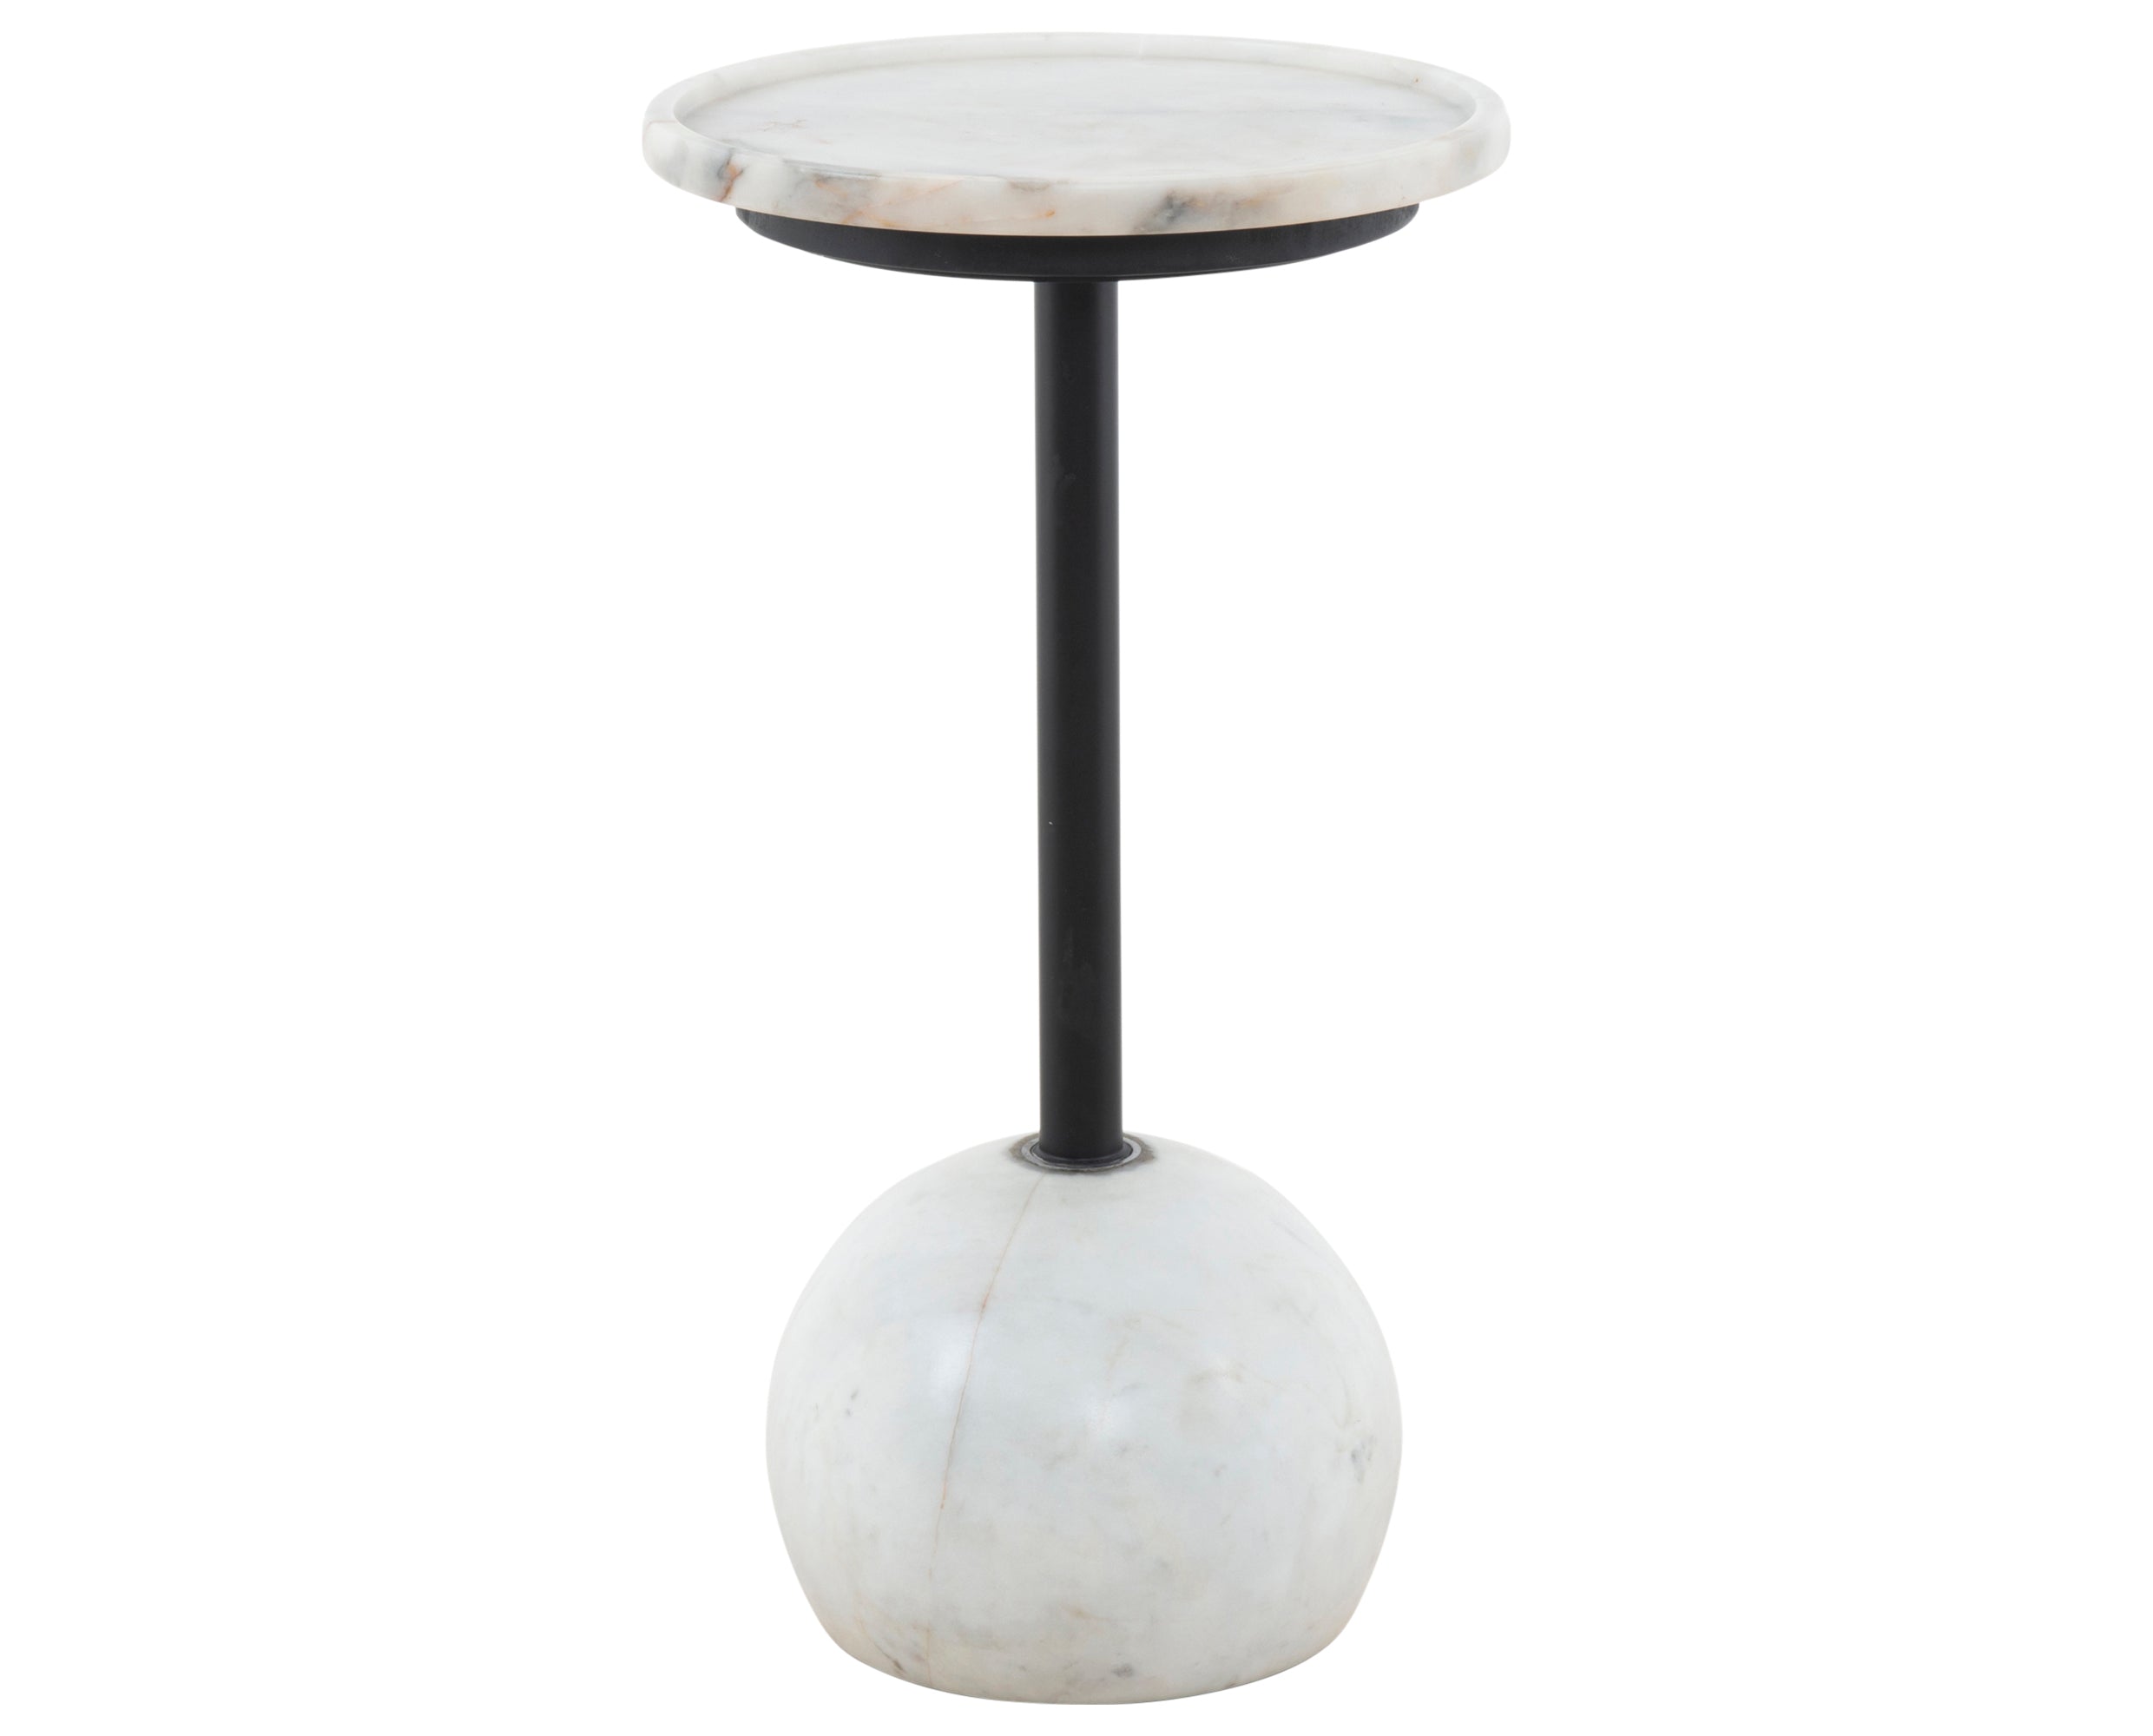 Polished White Marble with Dark Kettle Black Iron | Viola Accent Table | Valley Ridge Furniture